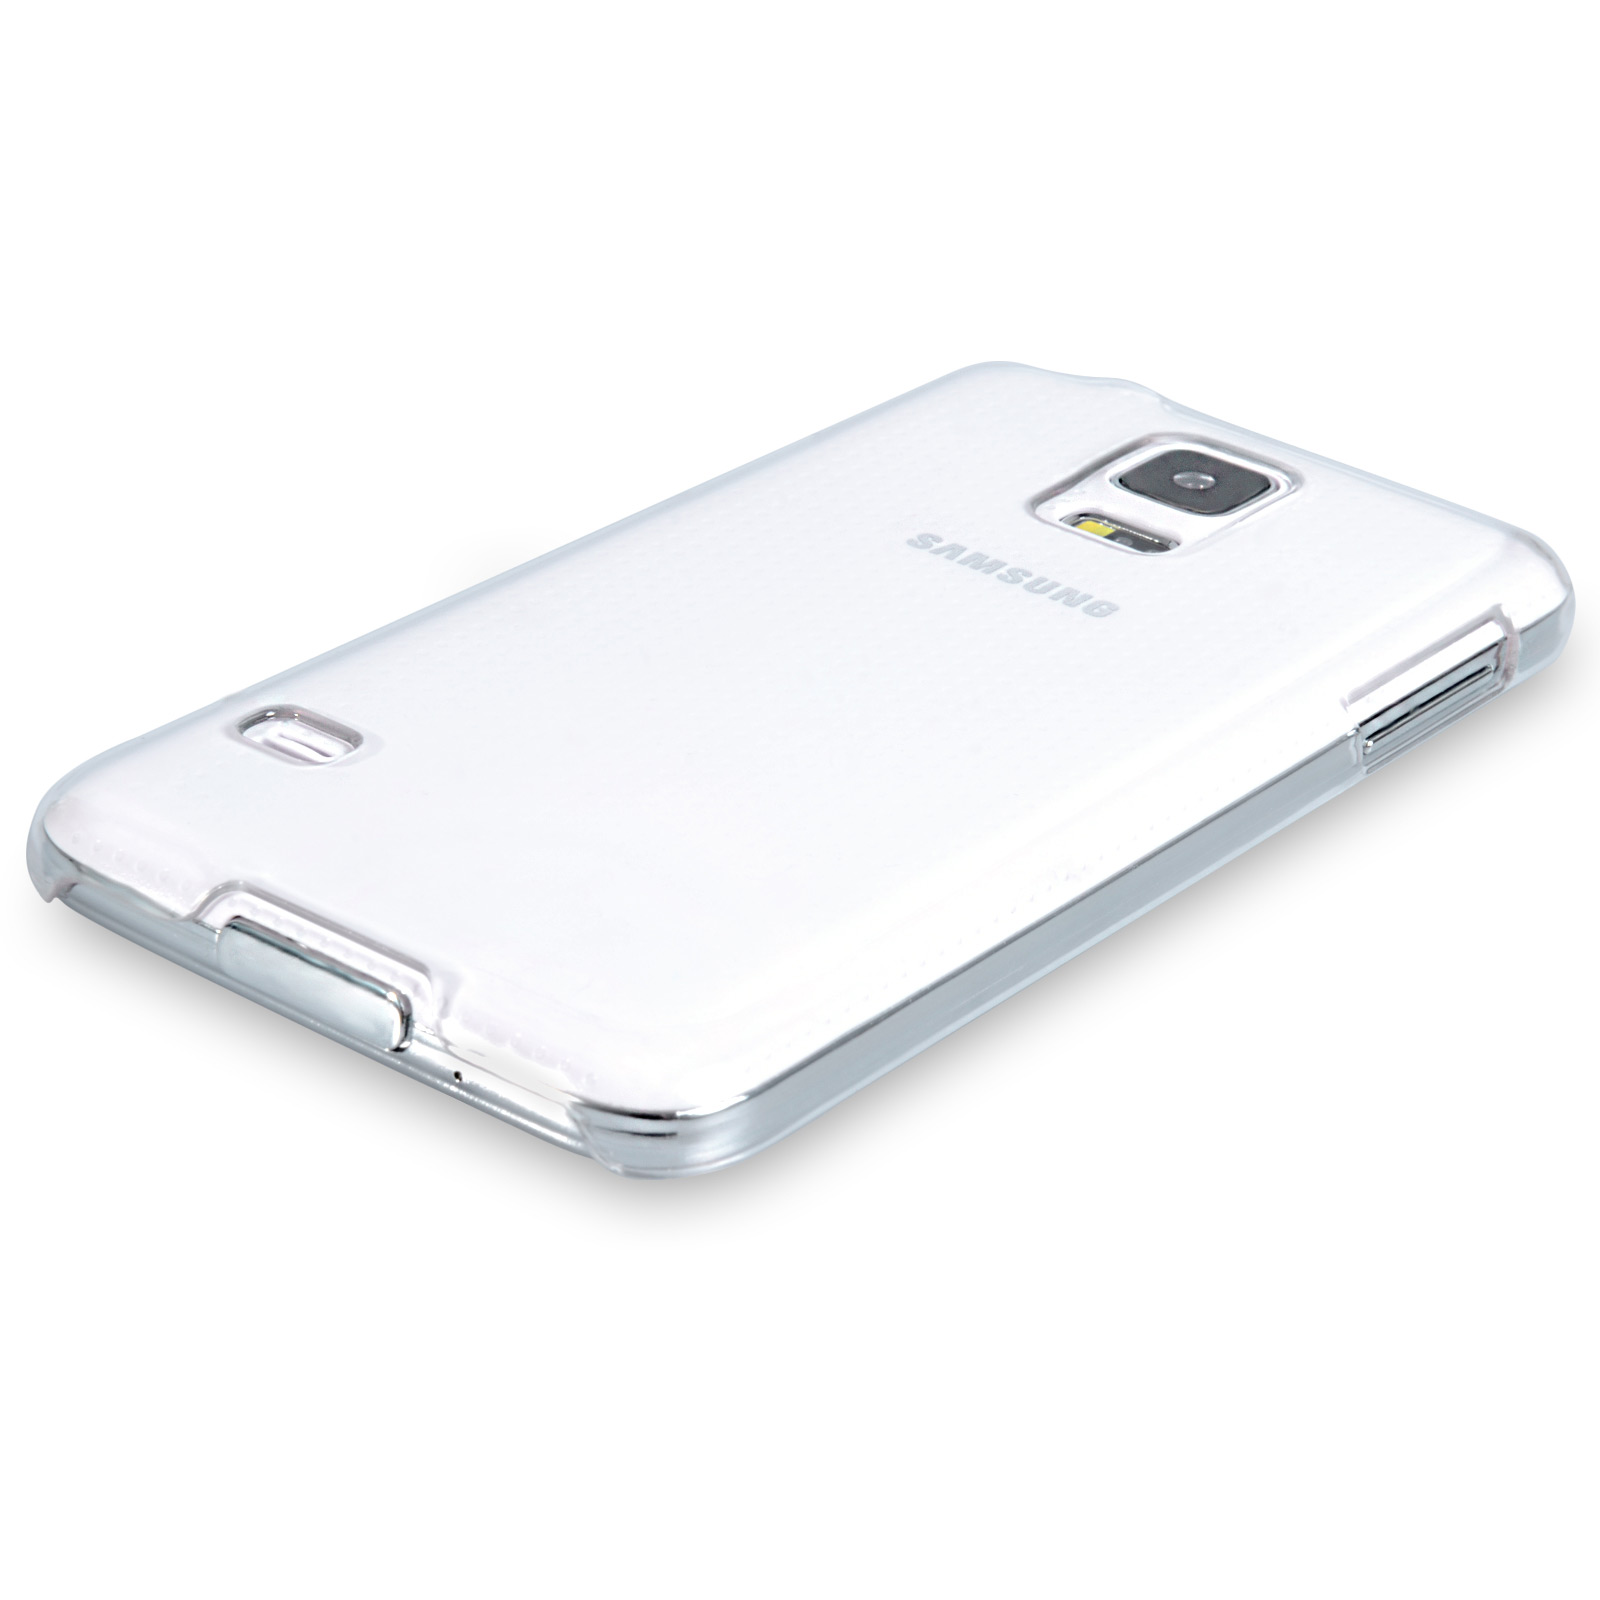 YouSave Accessories Samsung Galaxy S5 Hard Case - Crystal Clear